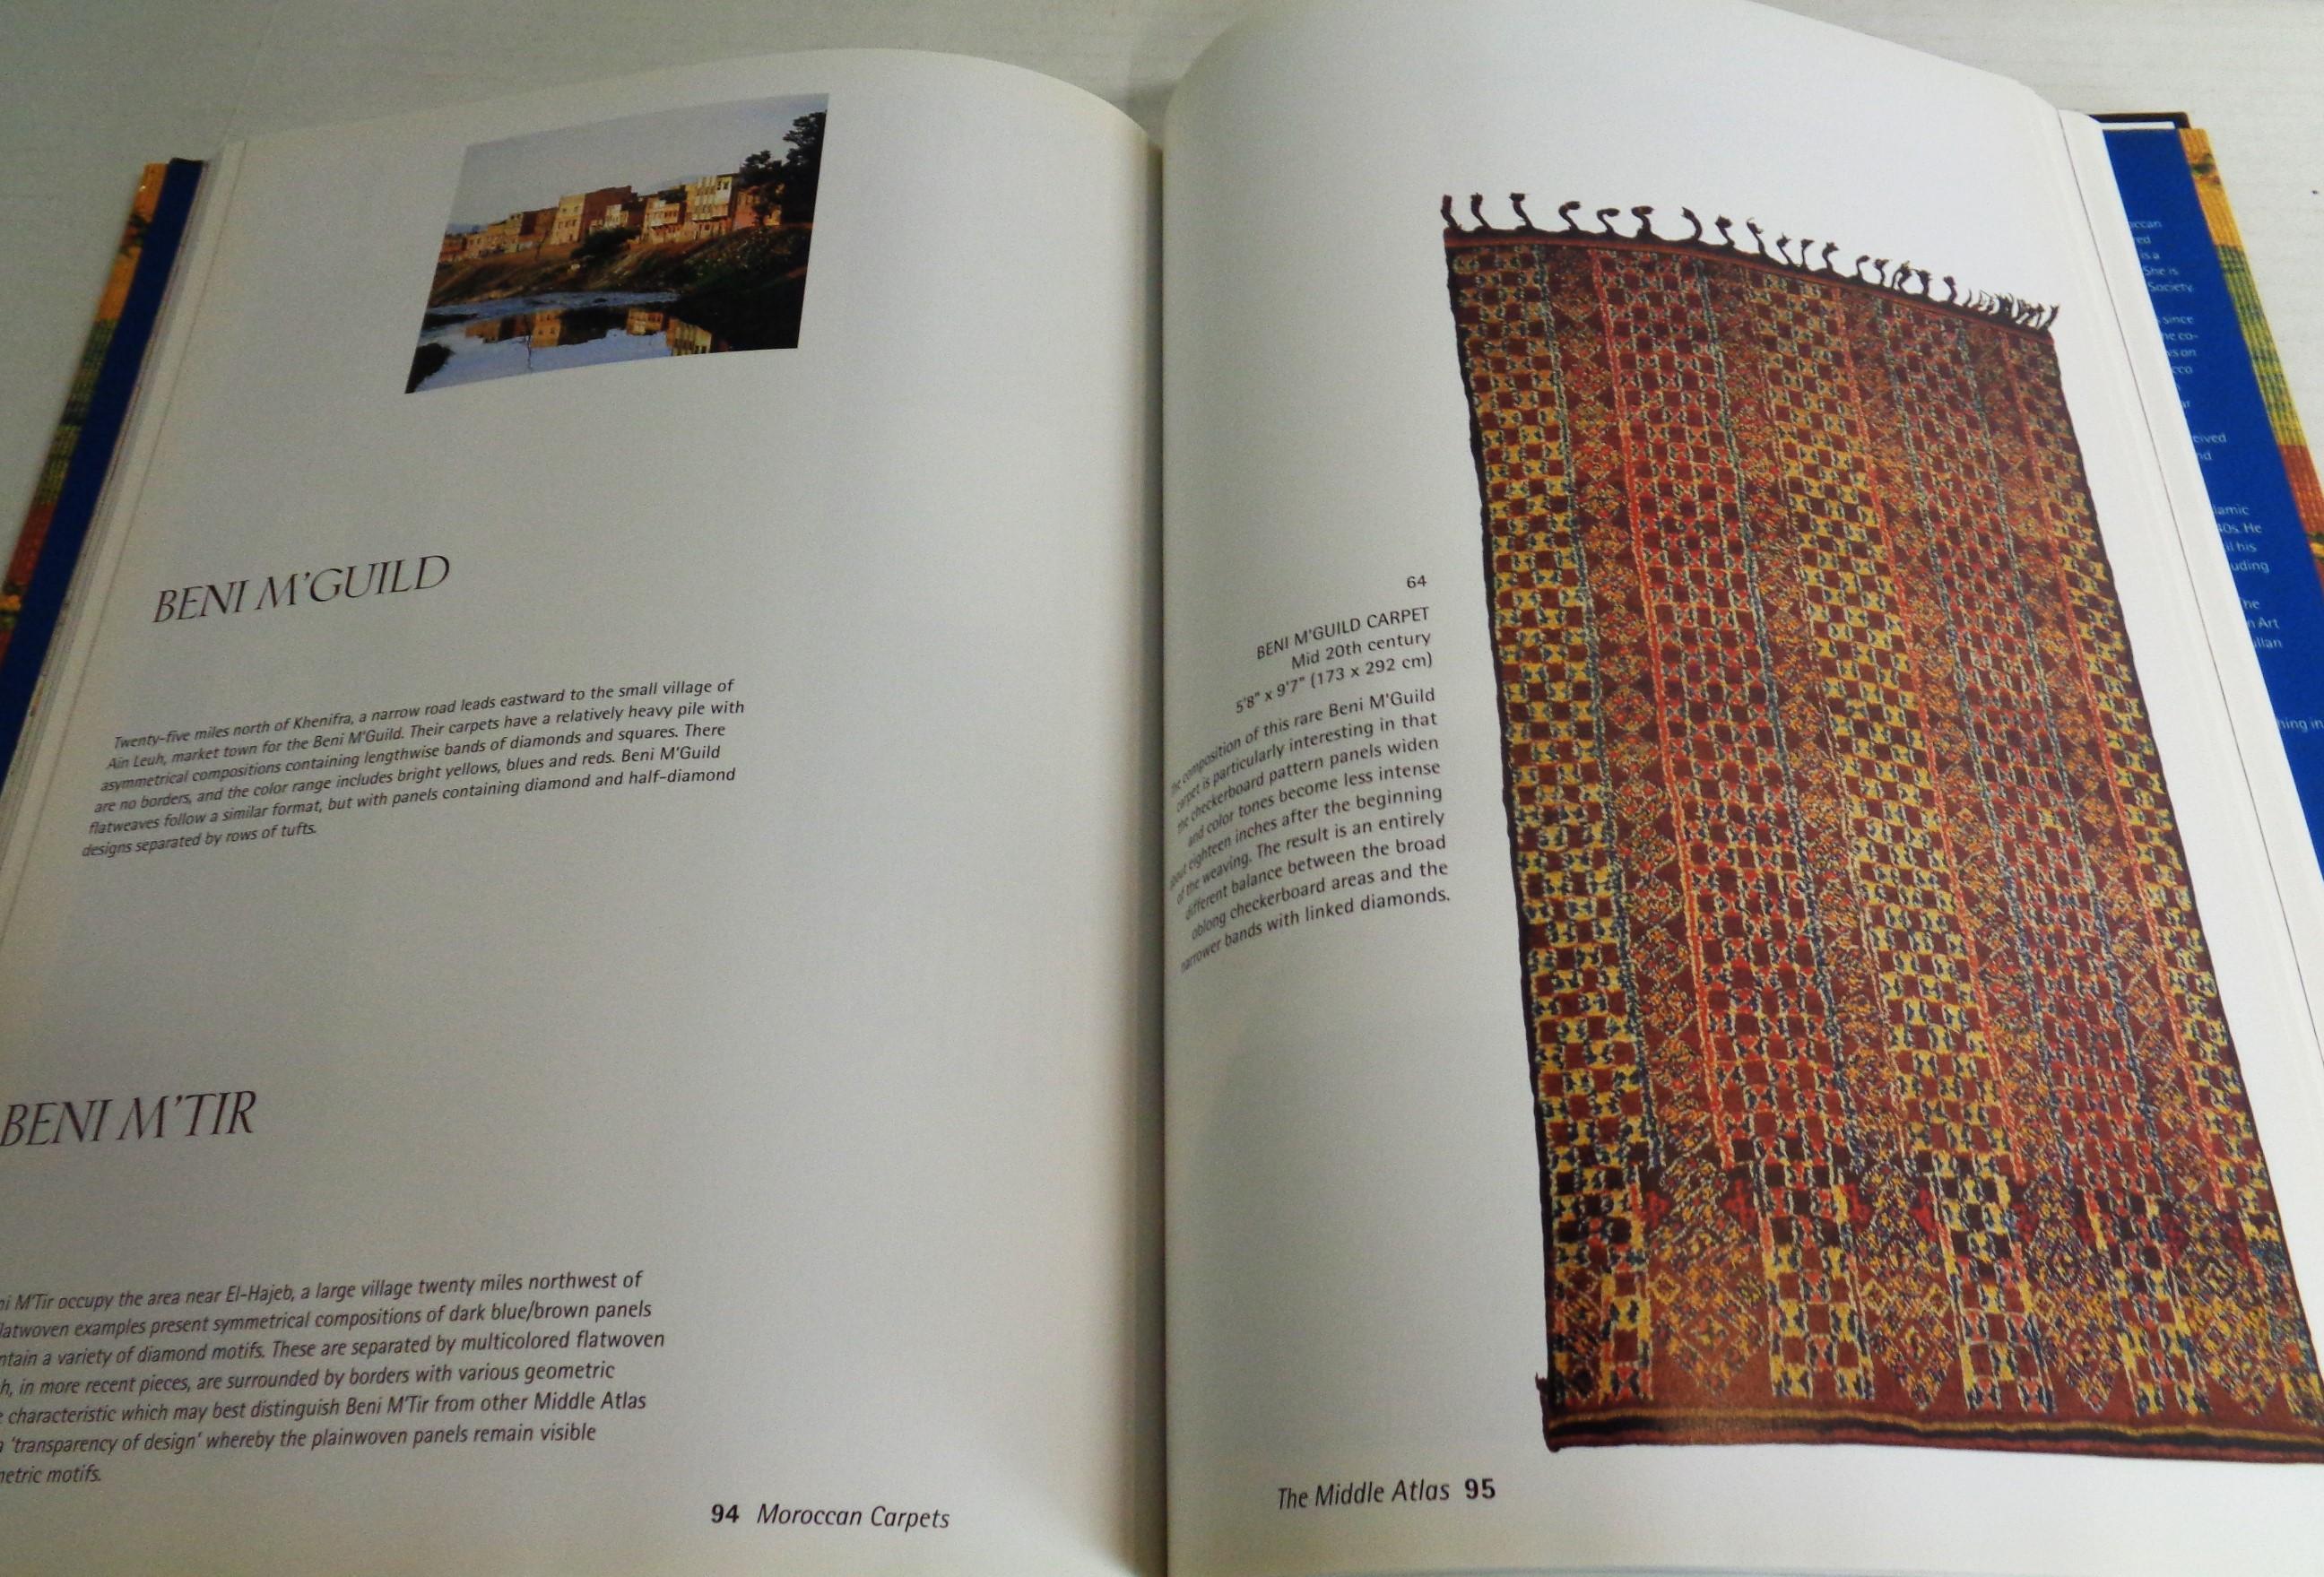  Moroccan Carpets: Pickering, Pickering, Yohe - Laurence King Hali Publications For Sale 9